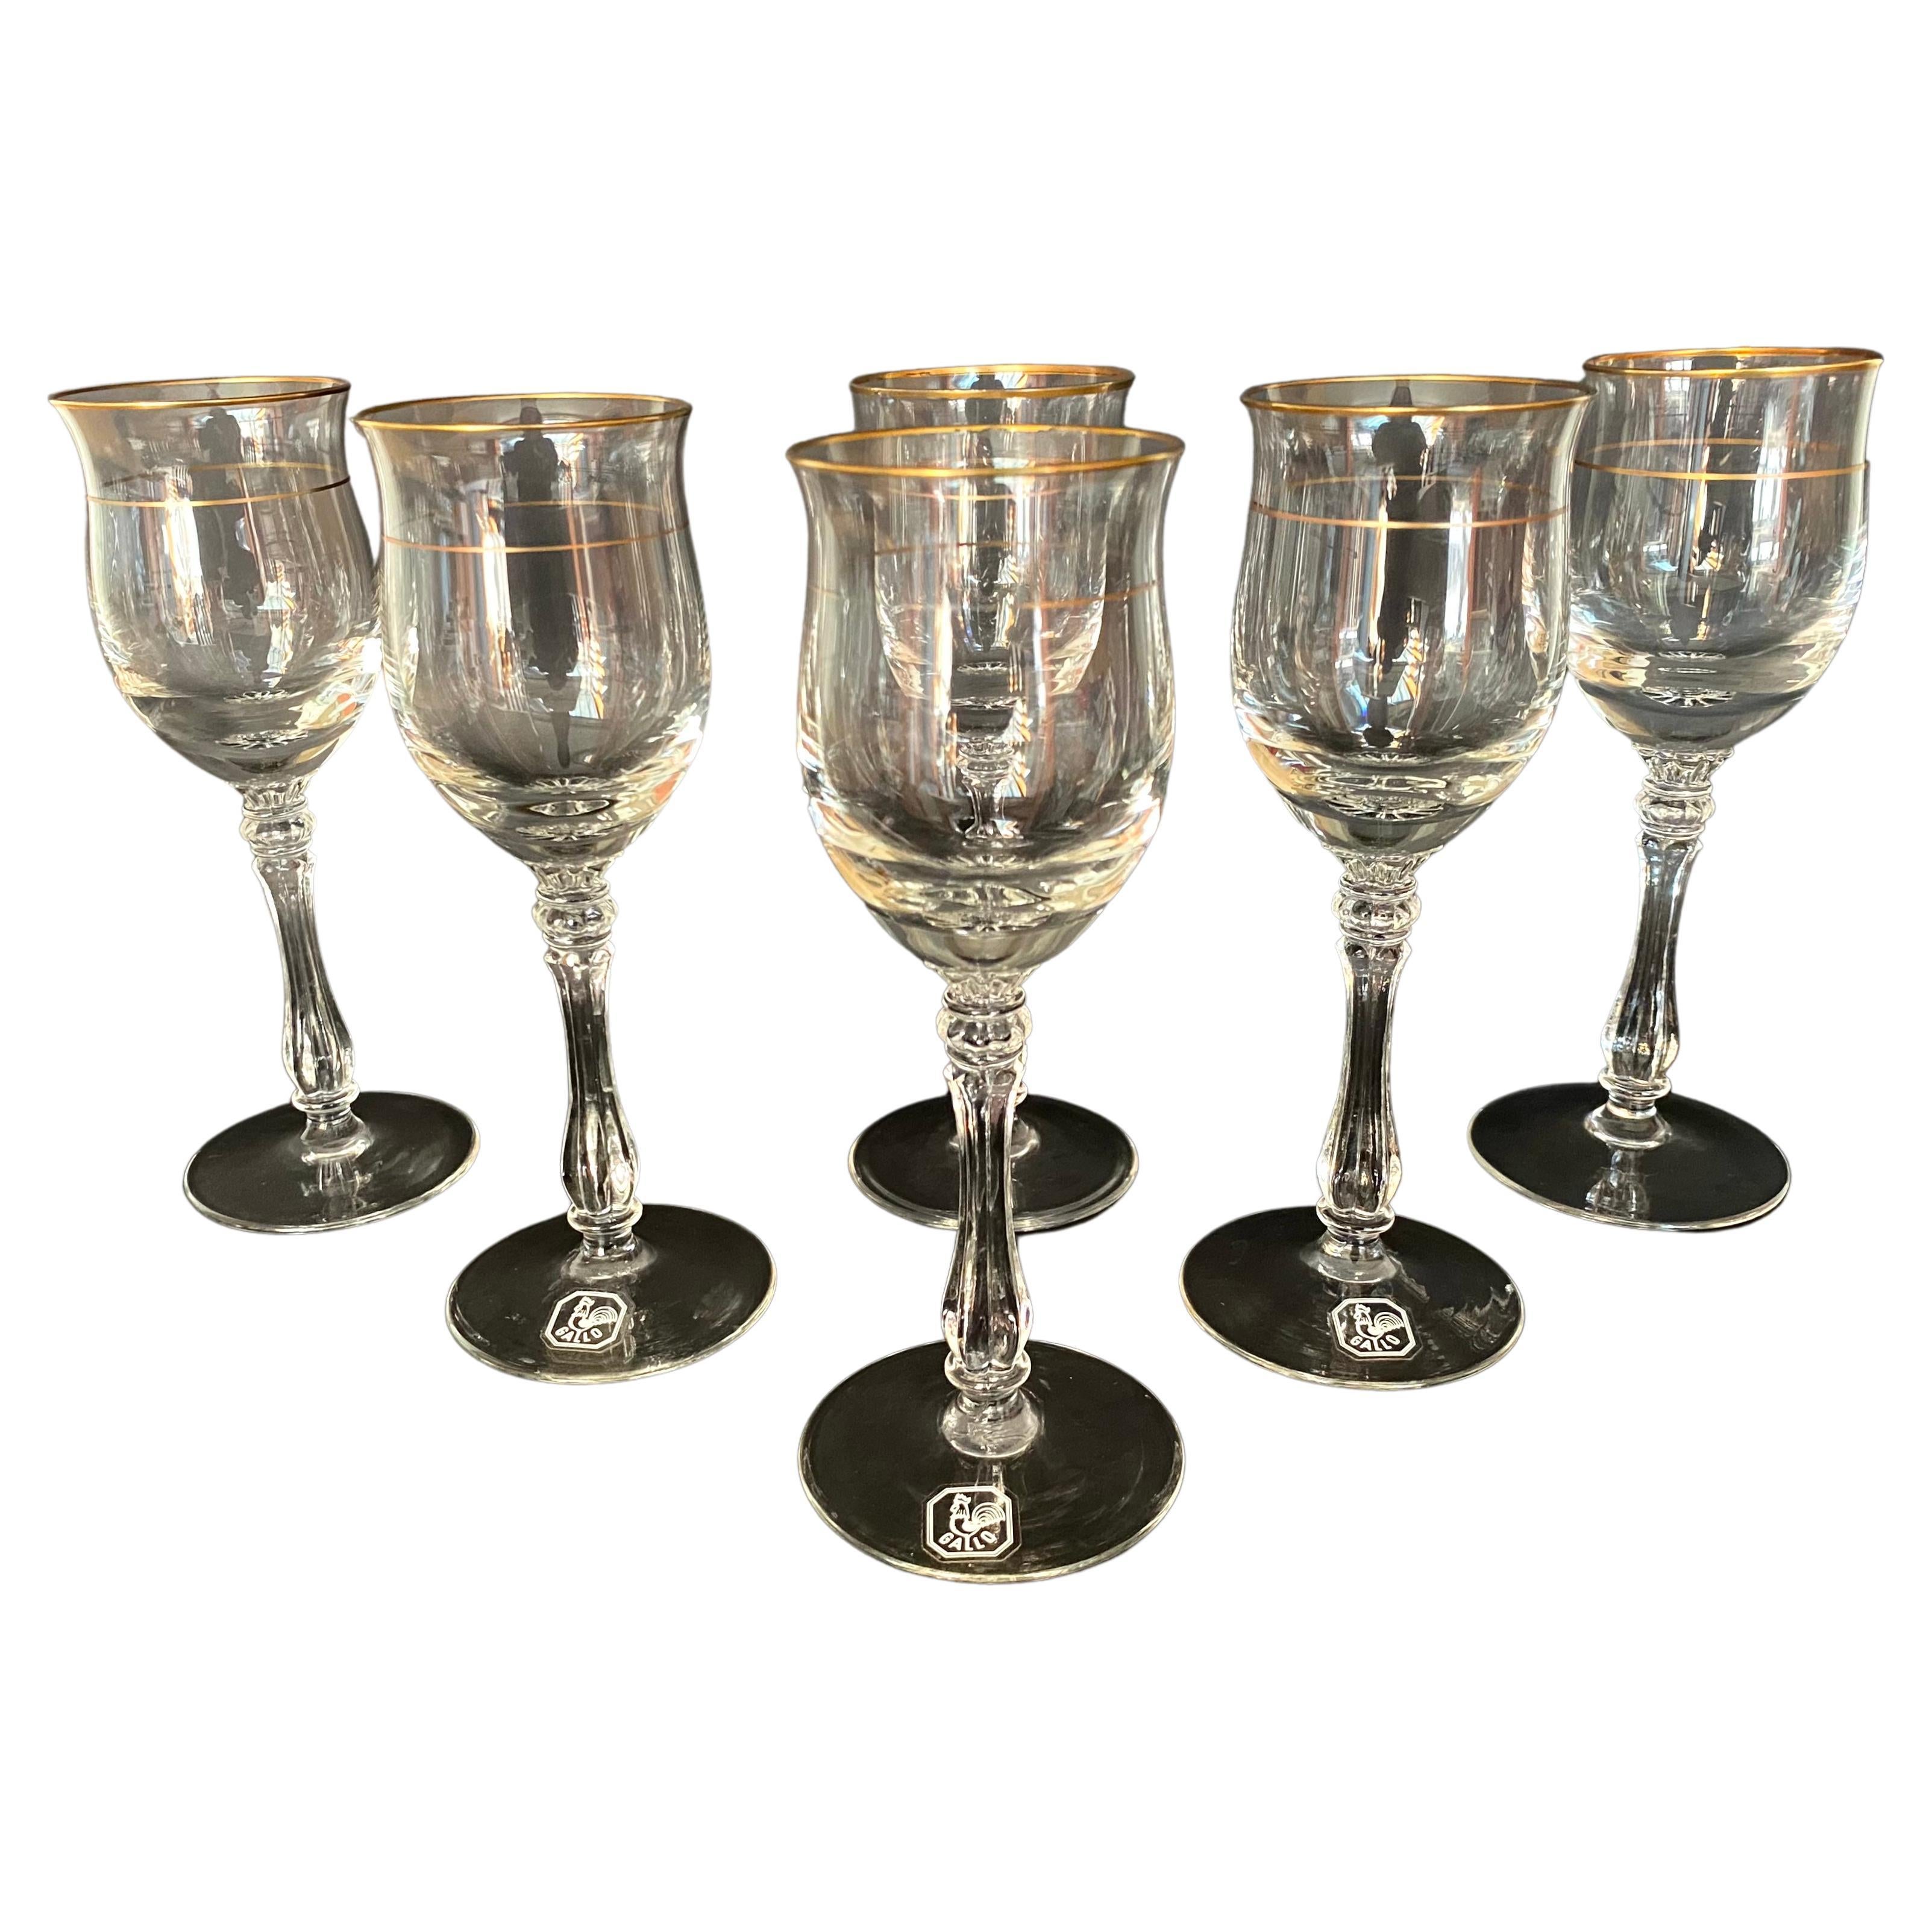 https://a.1stdibscdn.com/charming-vintage-set-of-6-crystal-cognac-glasses-by-gallo-germany-1970s-for-sale/f_60962/f_338422521681725045686/f_33842252_1681725046973_bg_processed.jpg